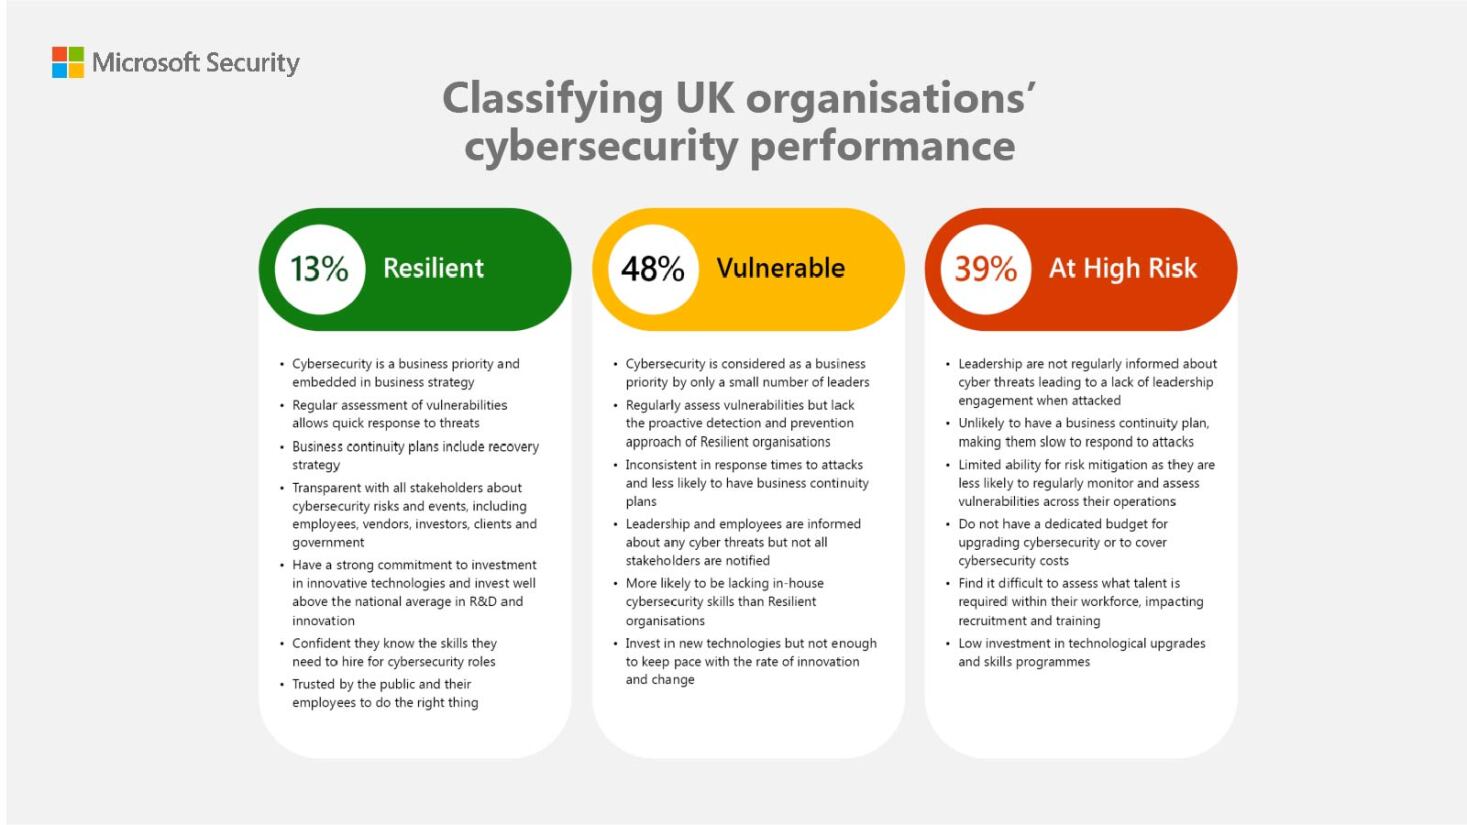 87% of UK organisations are vulnerable to cyberattacks in the age of AI